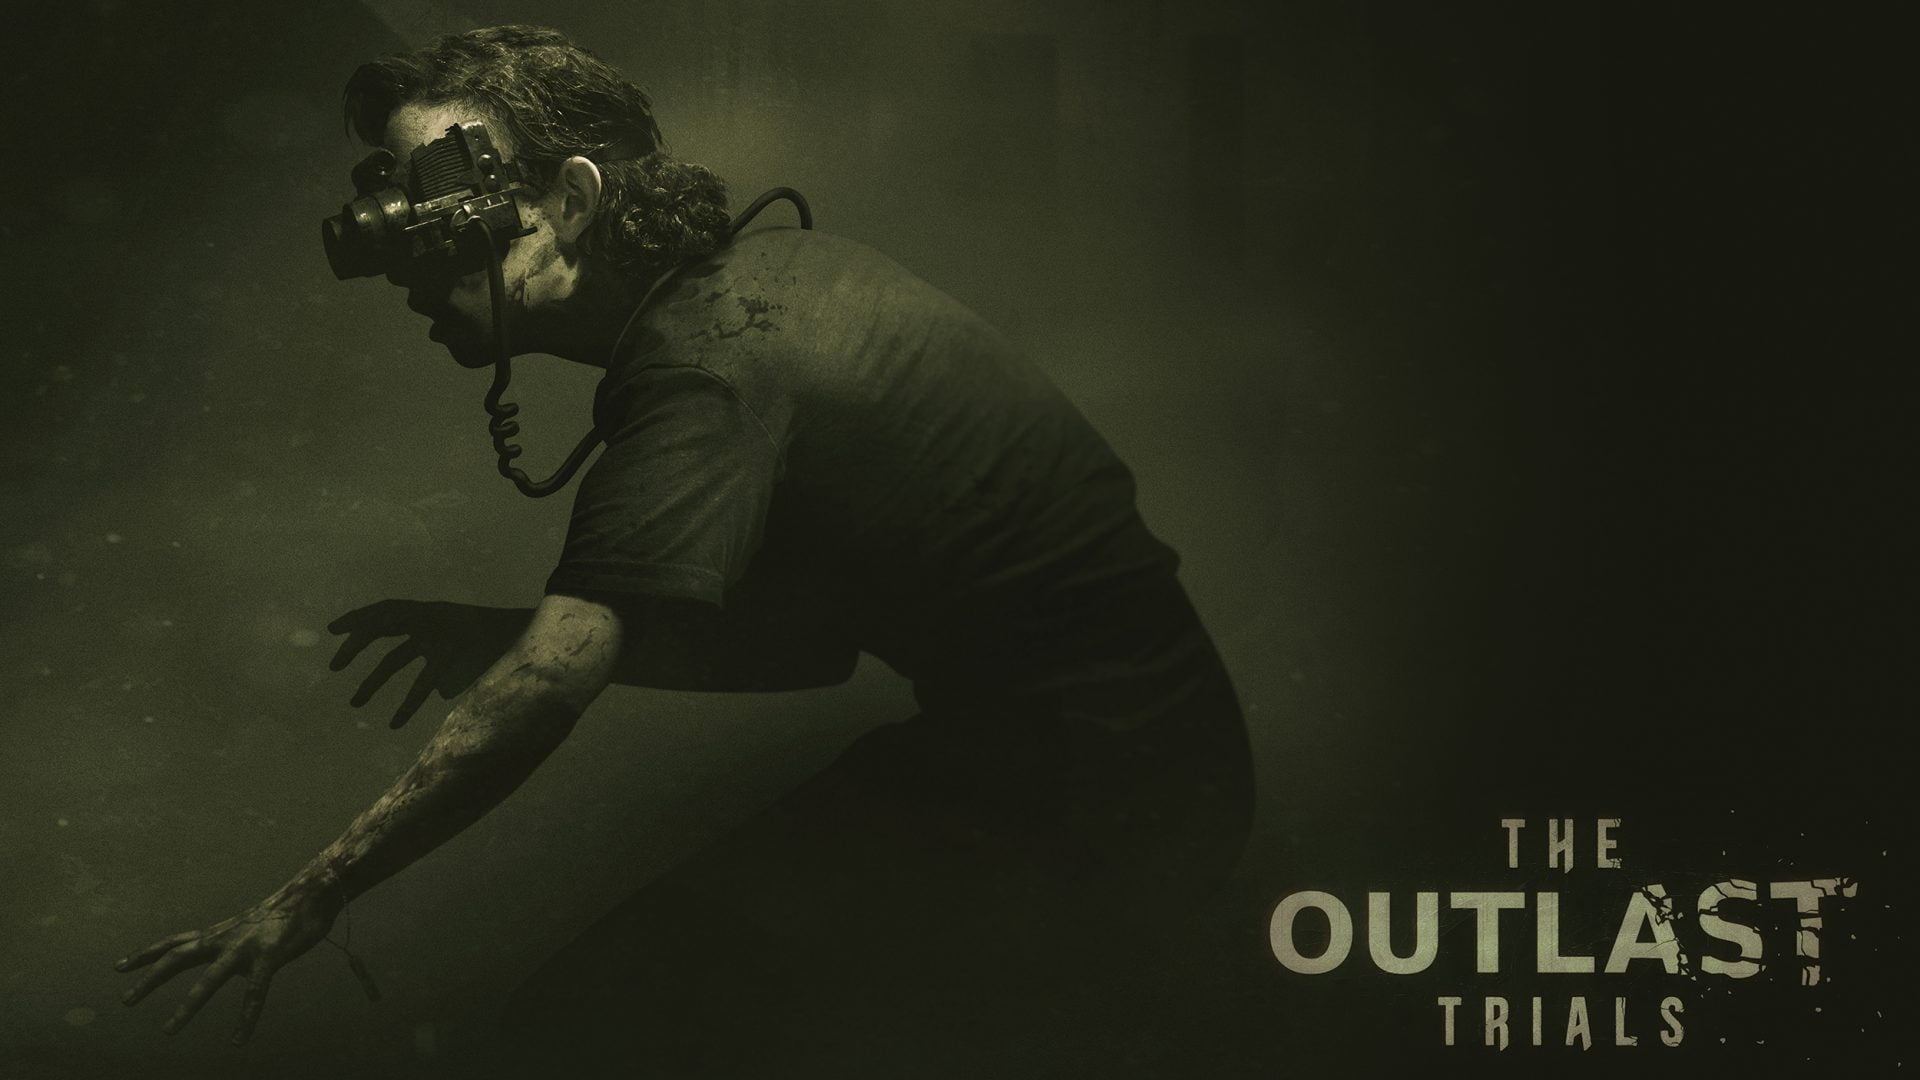 the outlast trials is a 4-player